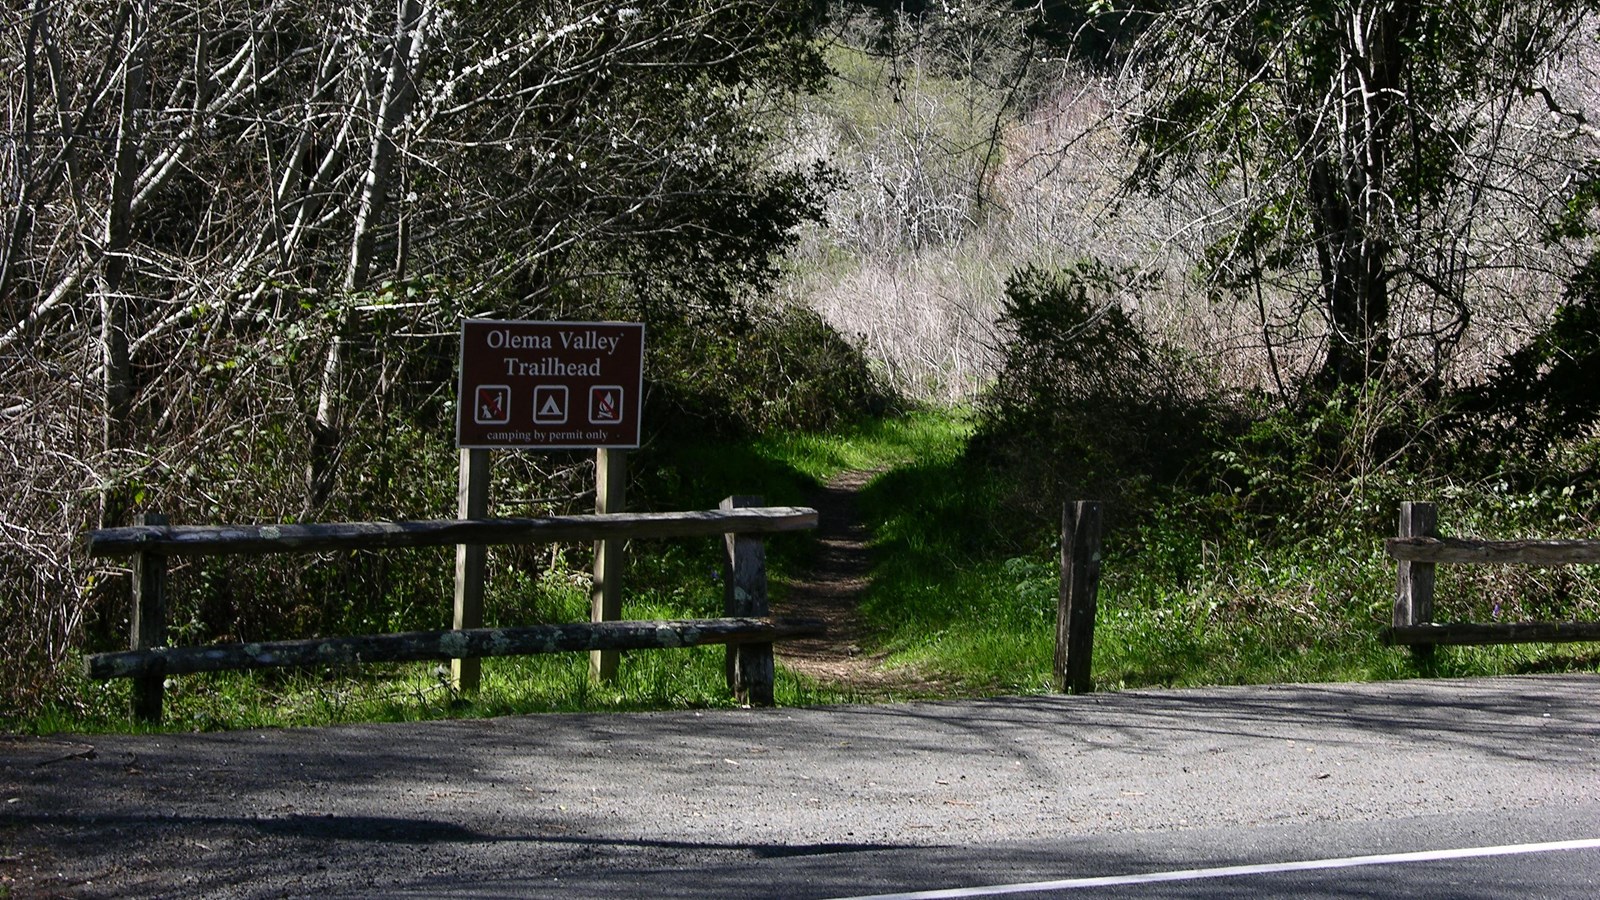 A moderate-sized brown trailhead sign stands behind a split-rail fence alongside a paved road.